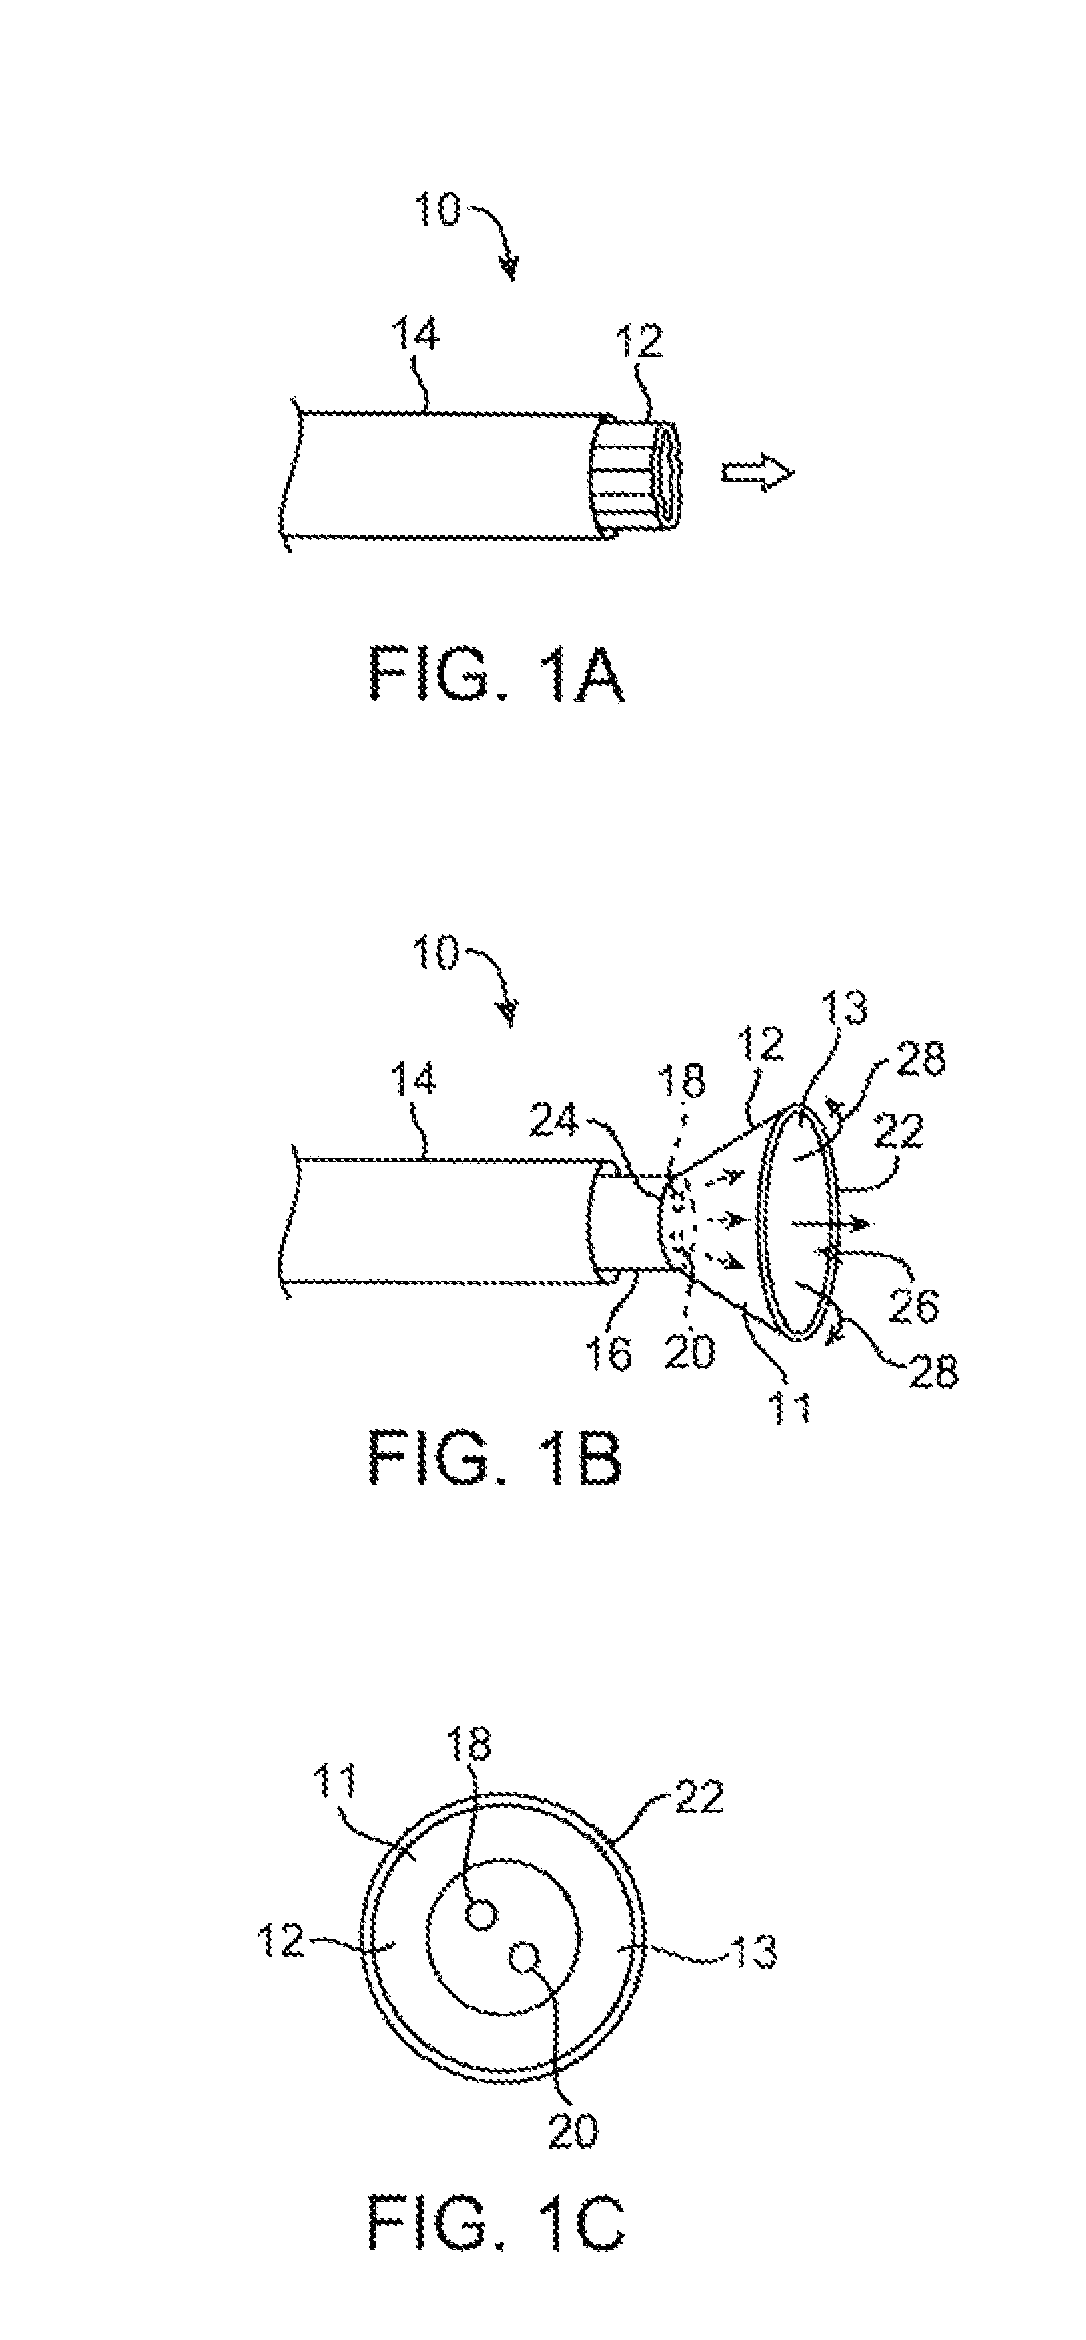 Method of forming electrode placement and connection systems